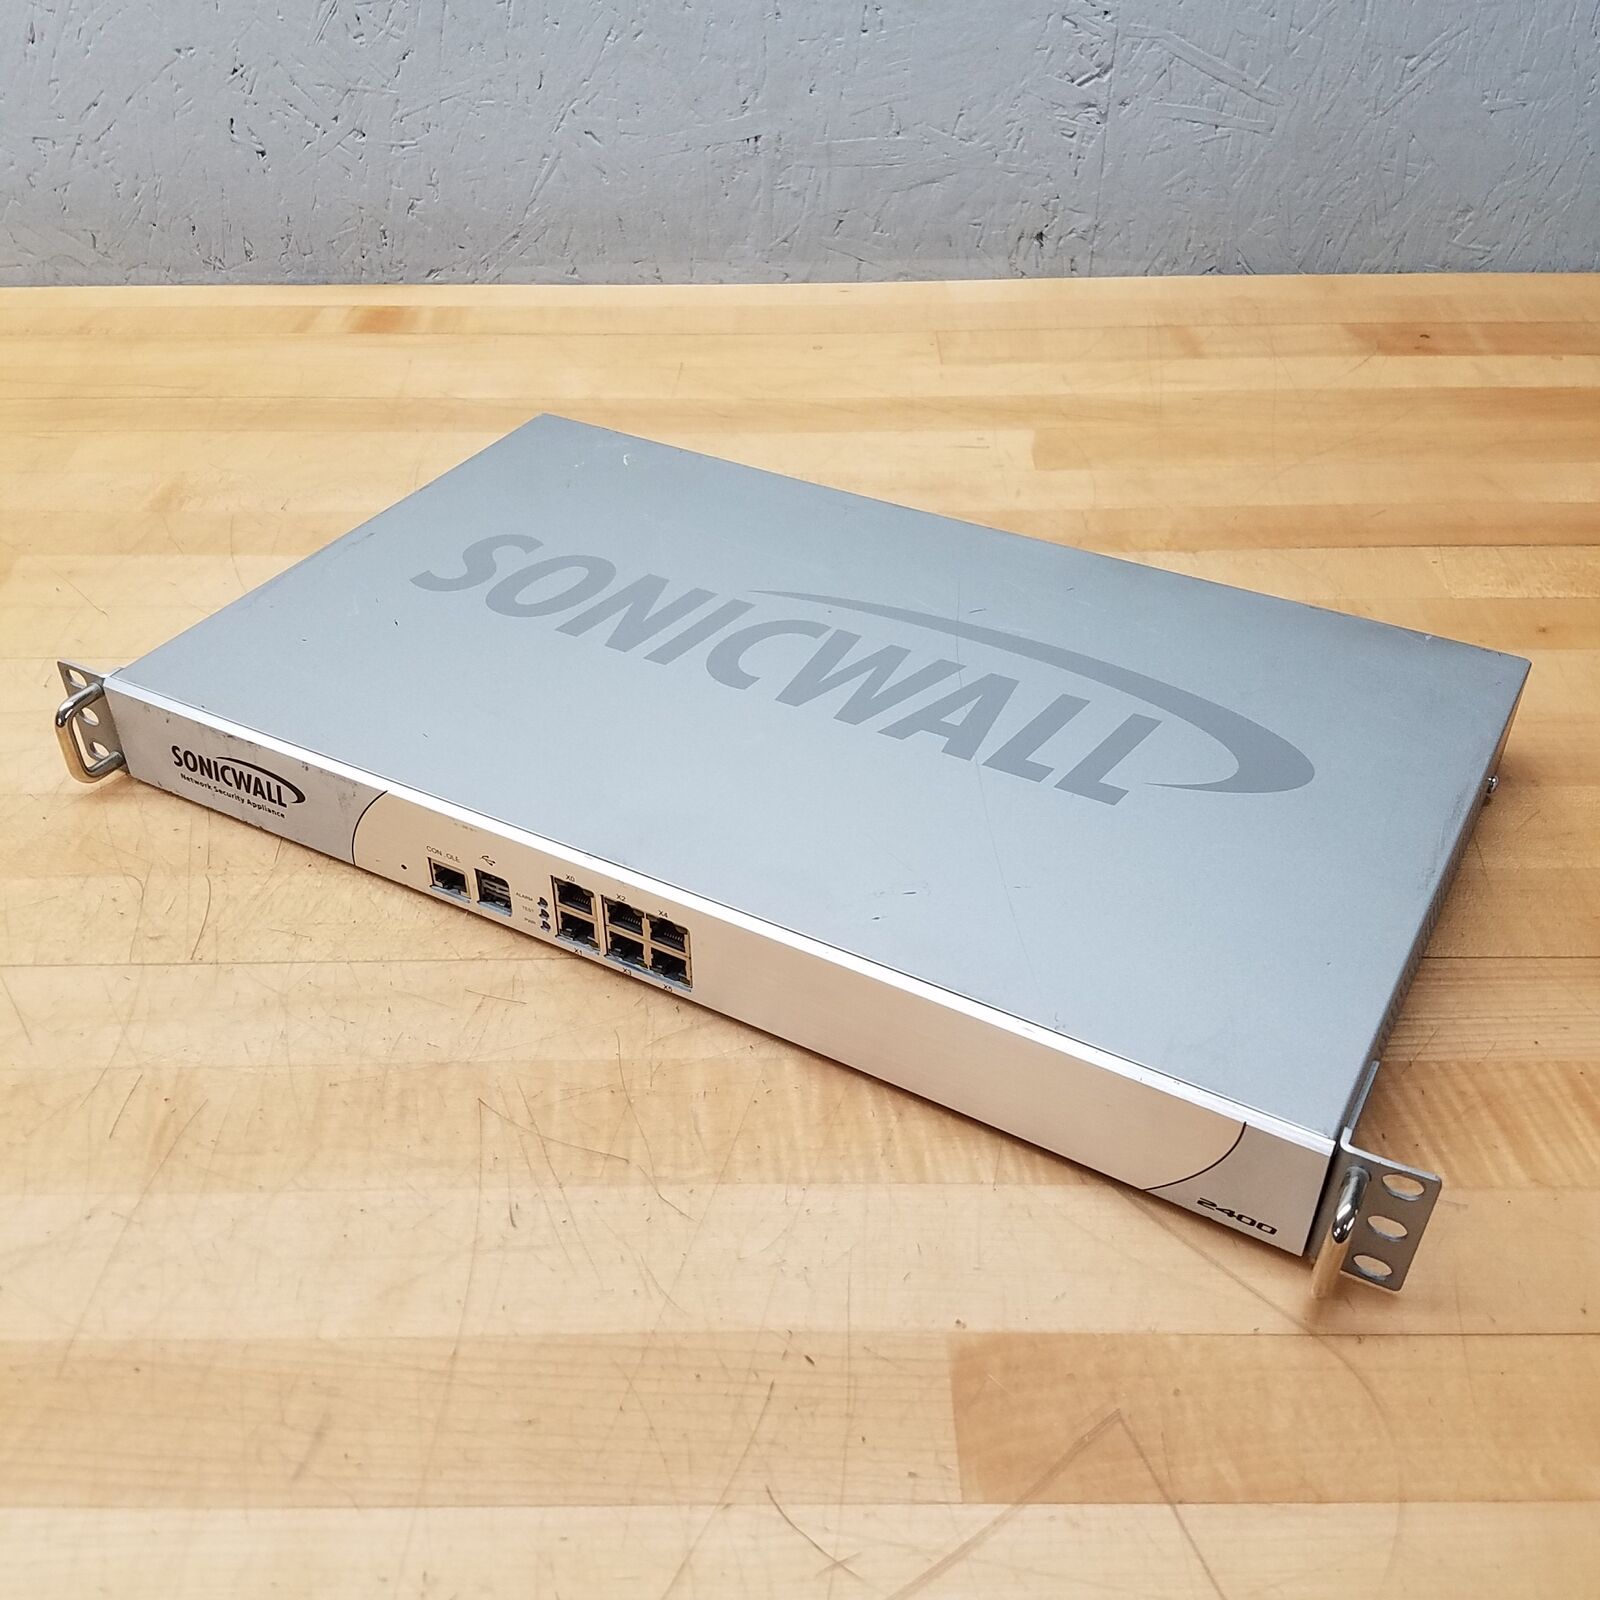 Sonicwall NSA 2400 Network Security Appliance, 1RK14-053 - USED